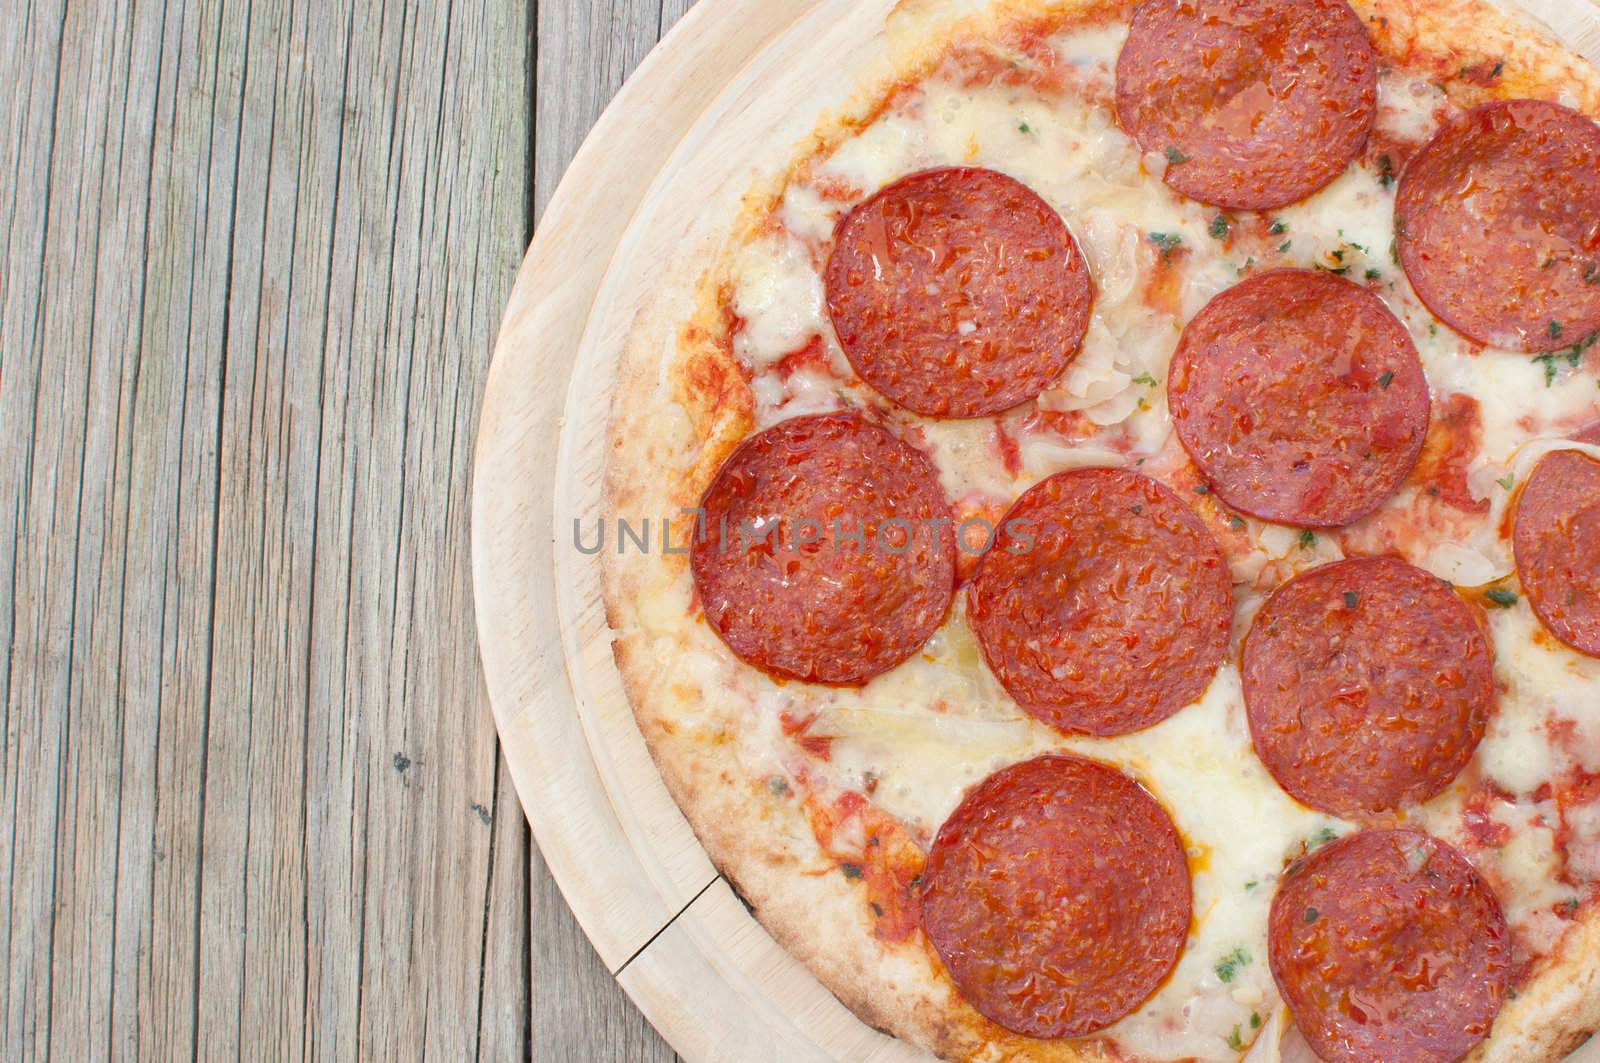 Closeup of a freshly cooked pepperoni pizza on a wooden board